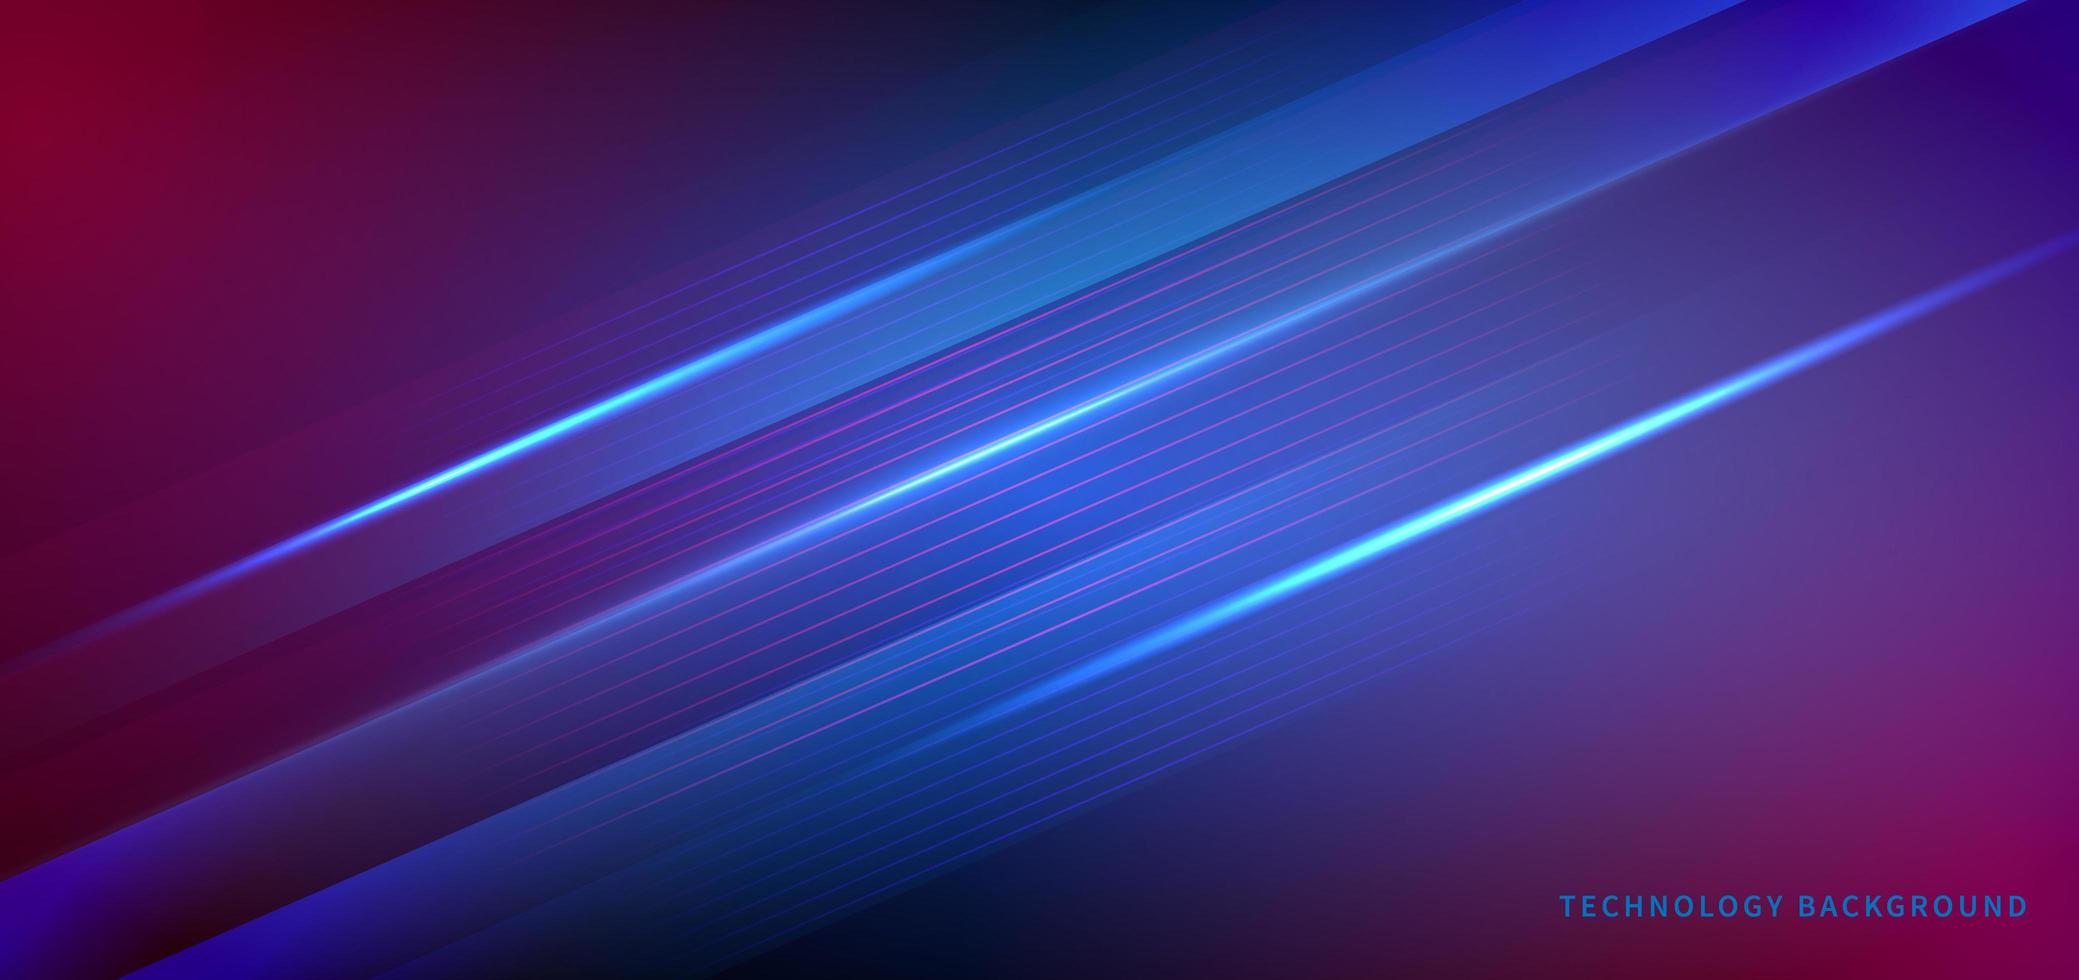 Technology futuristic background striped lines with light effect on blue, pink background. vector